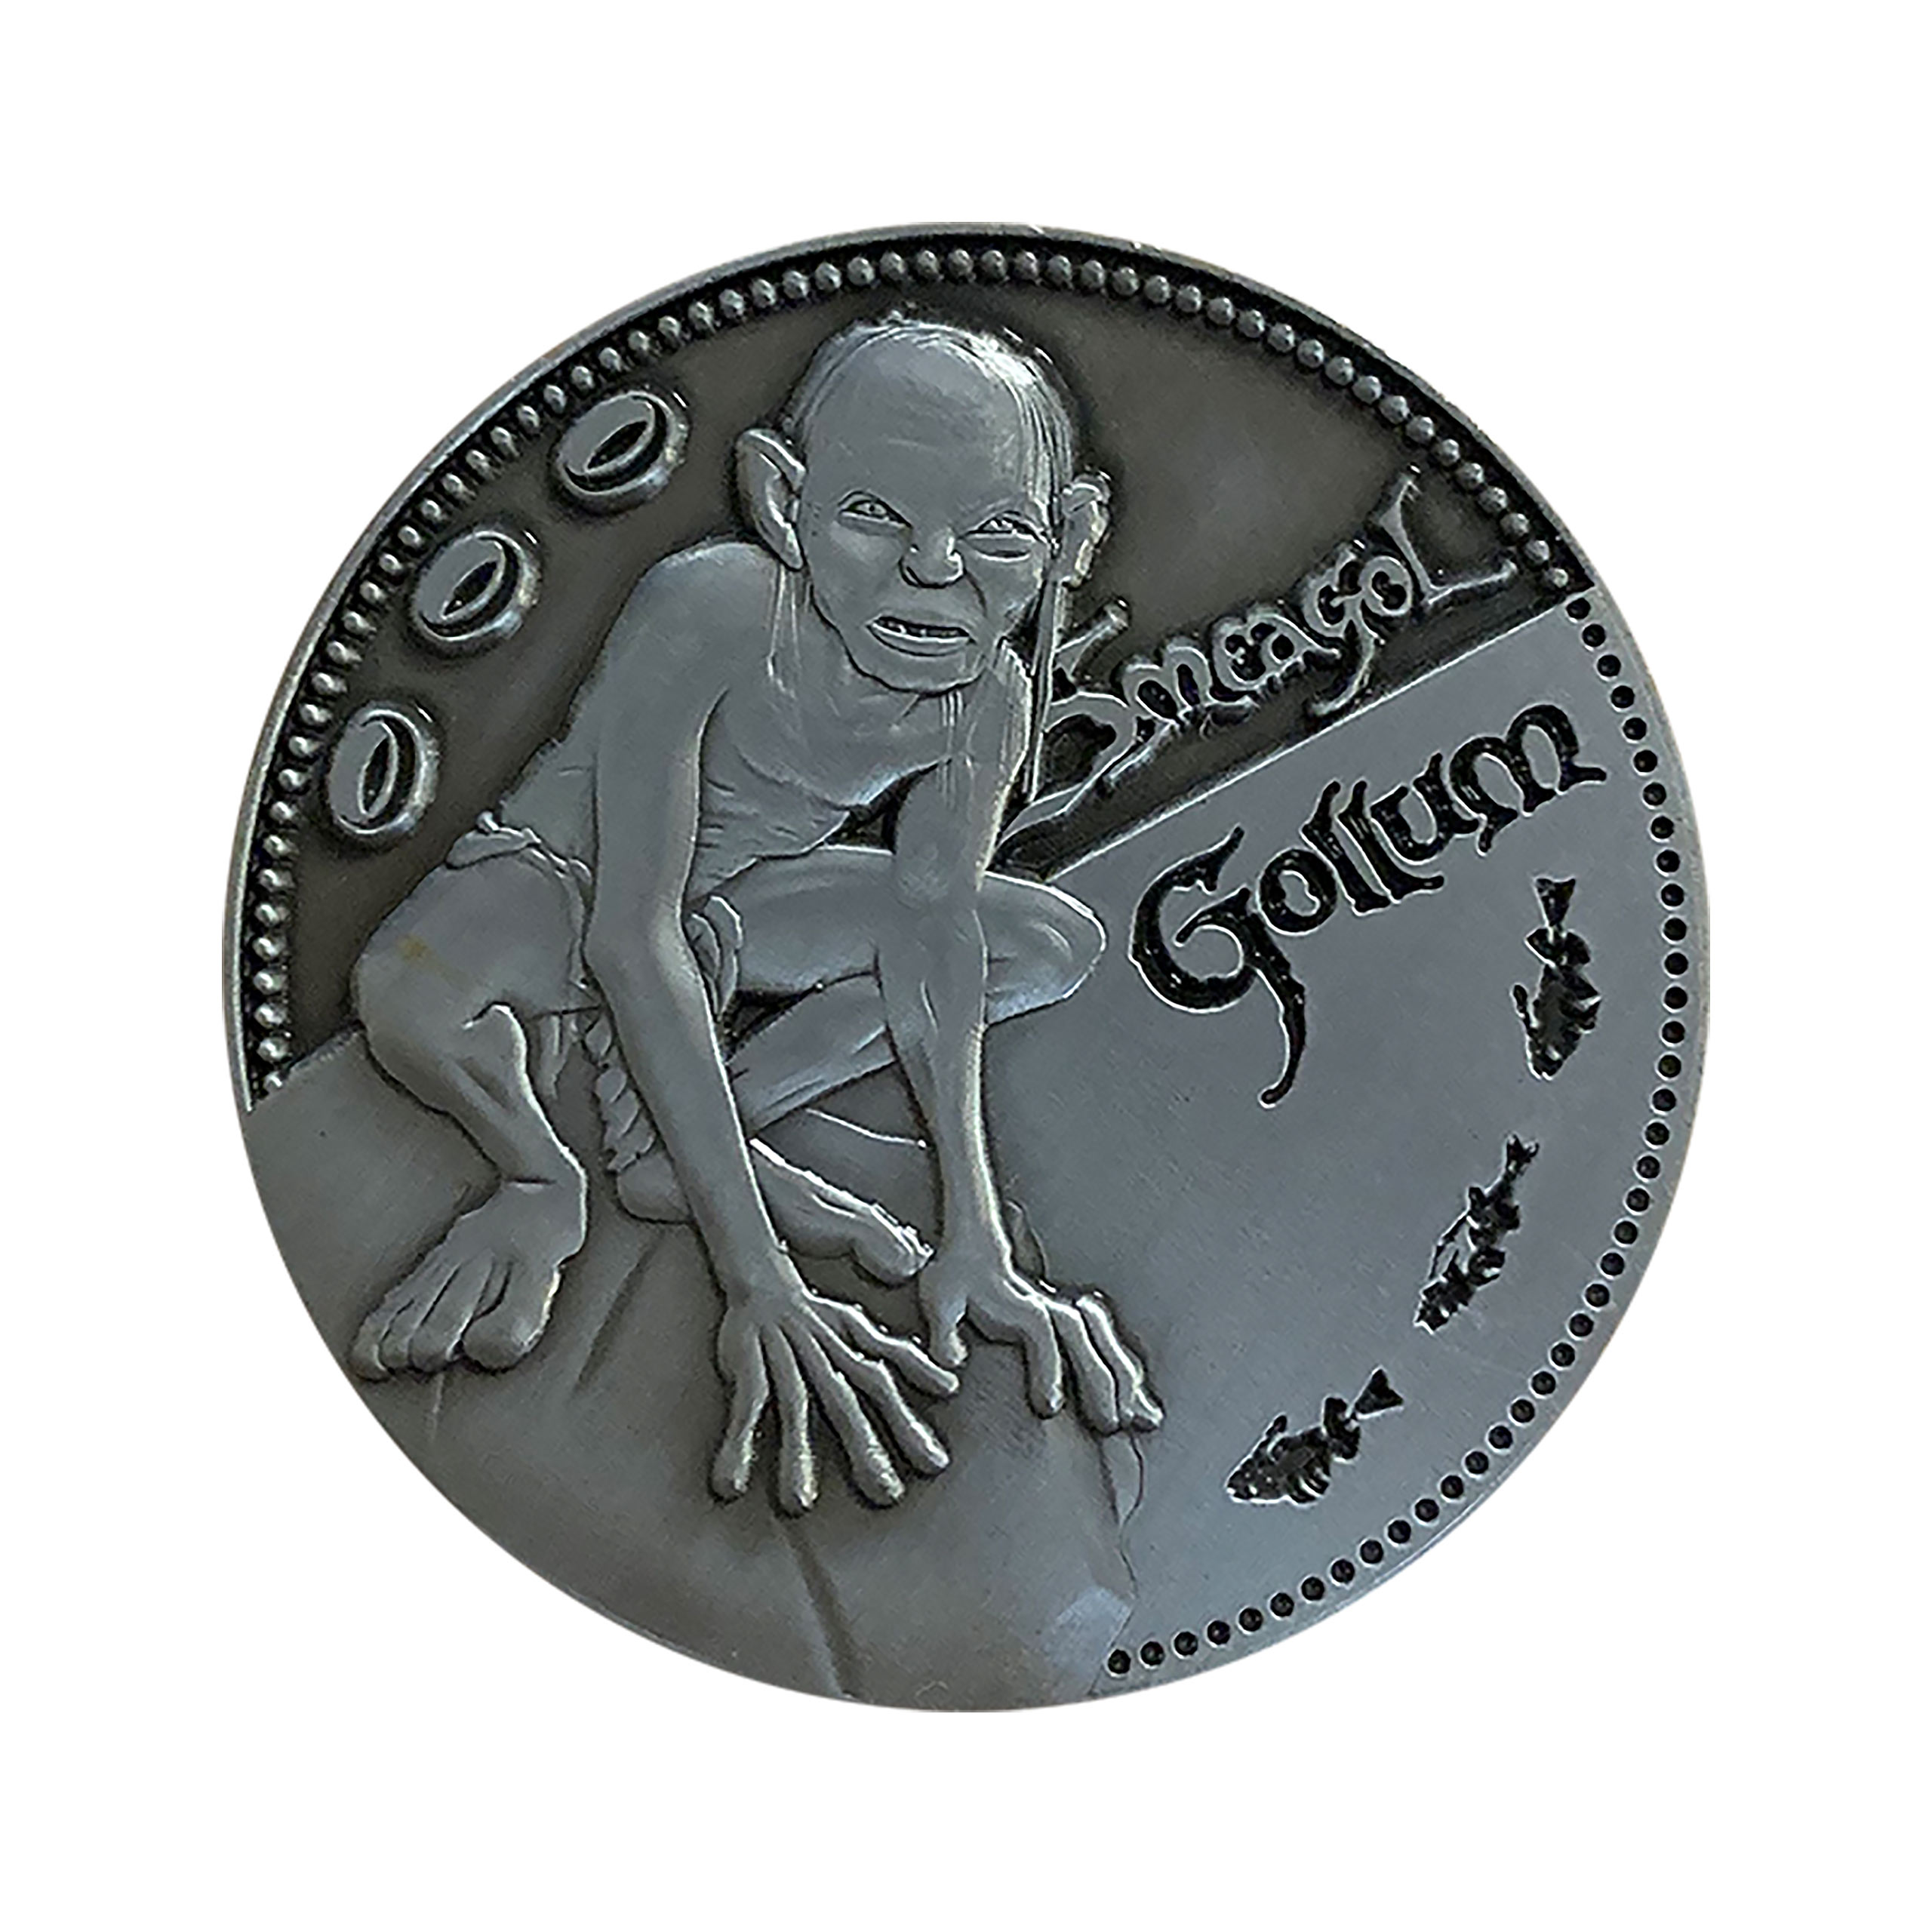 Lord of the Rings - Gollum Collector's Coin